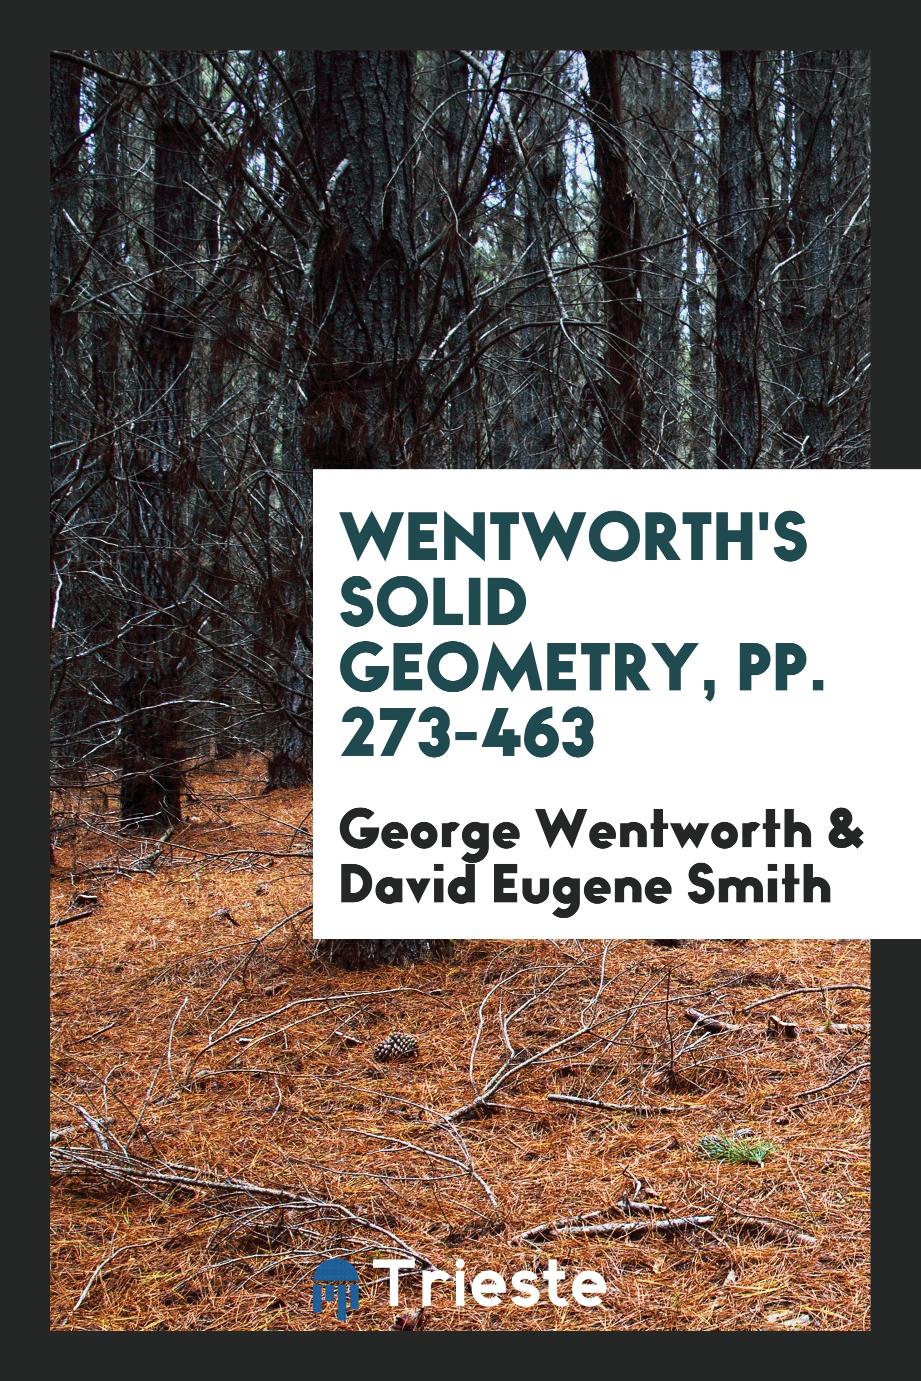 Wentworth's solid geometry, pp. 273-463